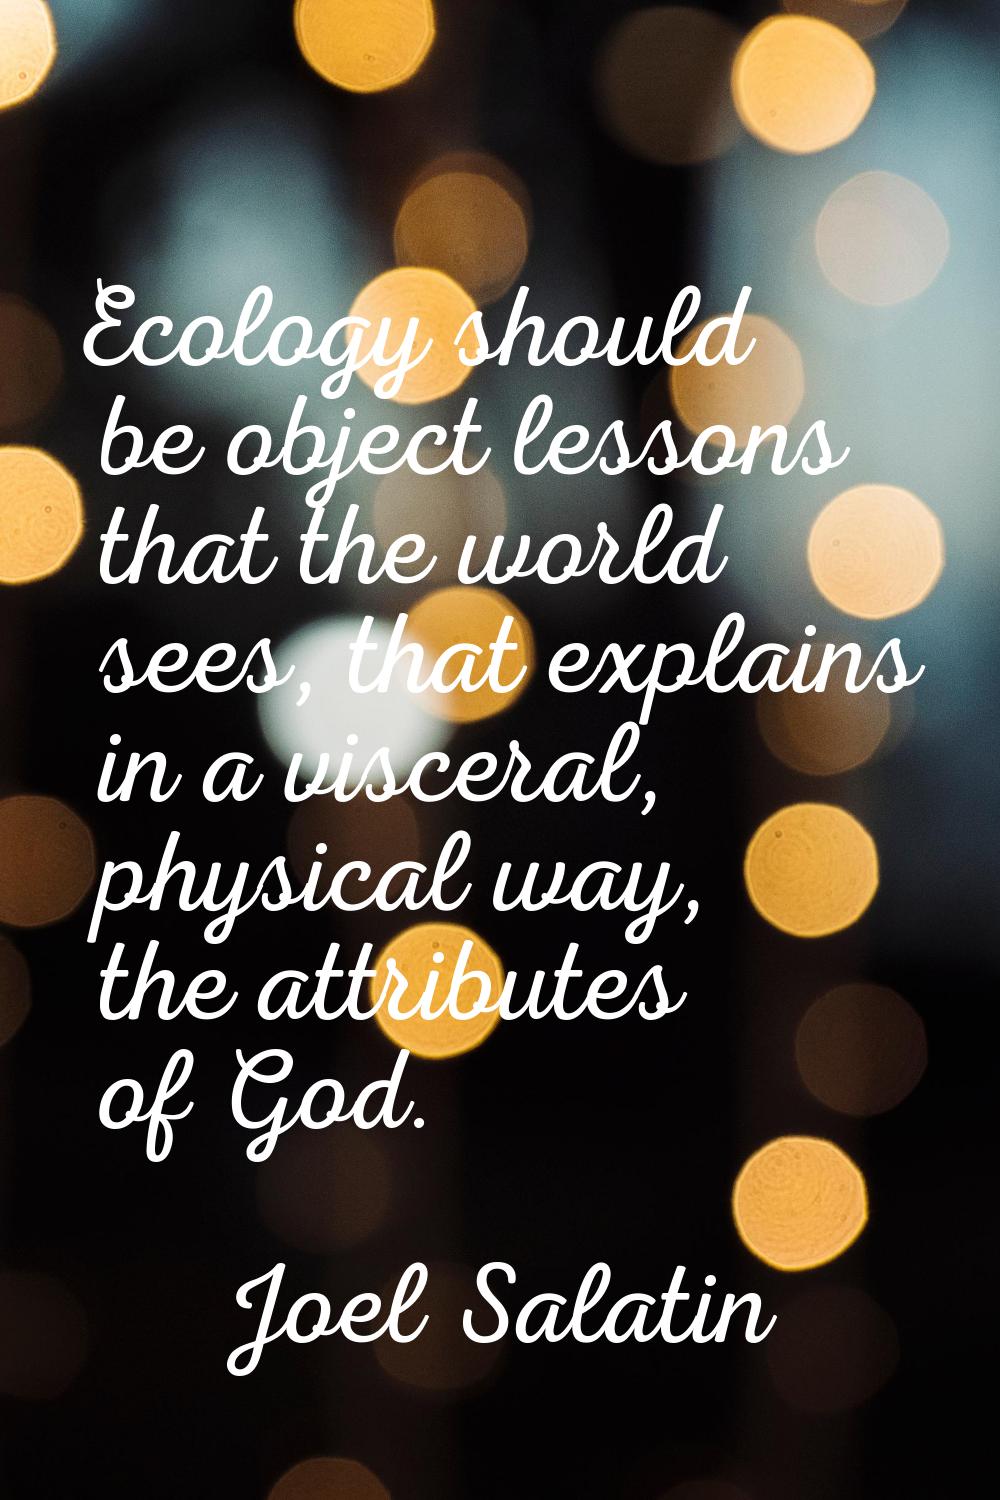 Ecology should be object lessons that the world sees, that explains in a visceral, physical way, th